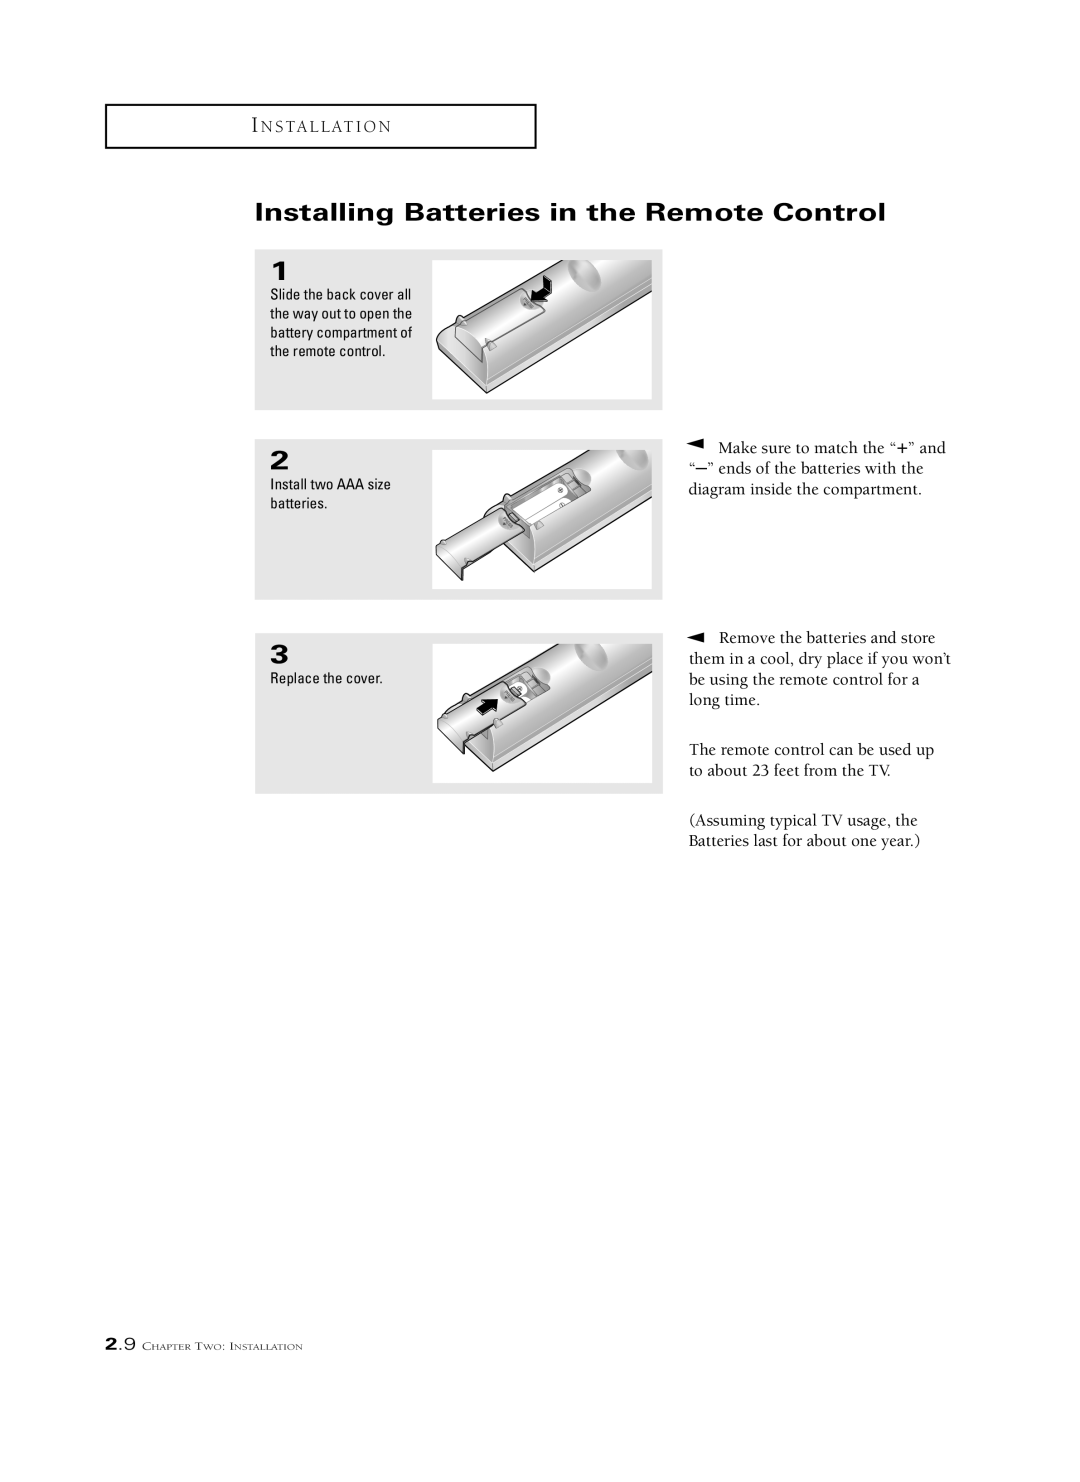 Samsung HCL 473W, HCM6525W Installing Batteries in the Remote Control, Install two AAA size batteries, Replace the cover 